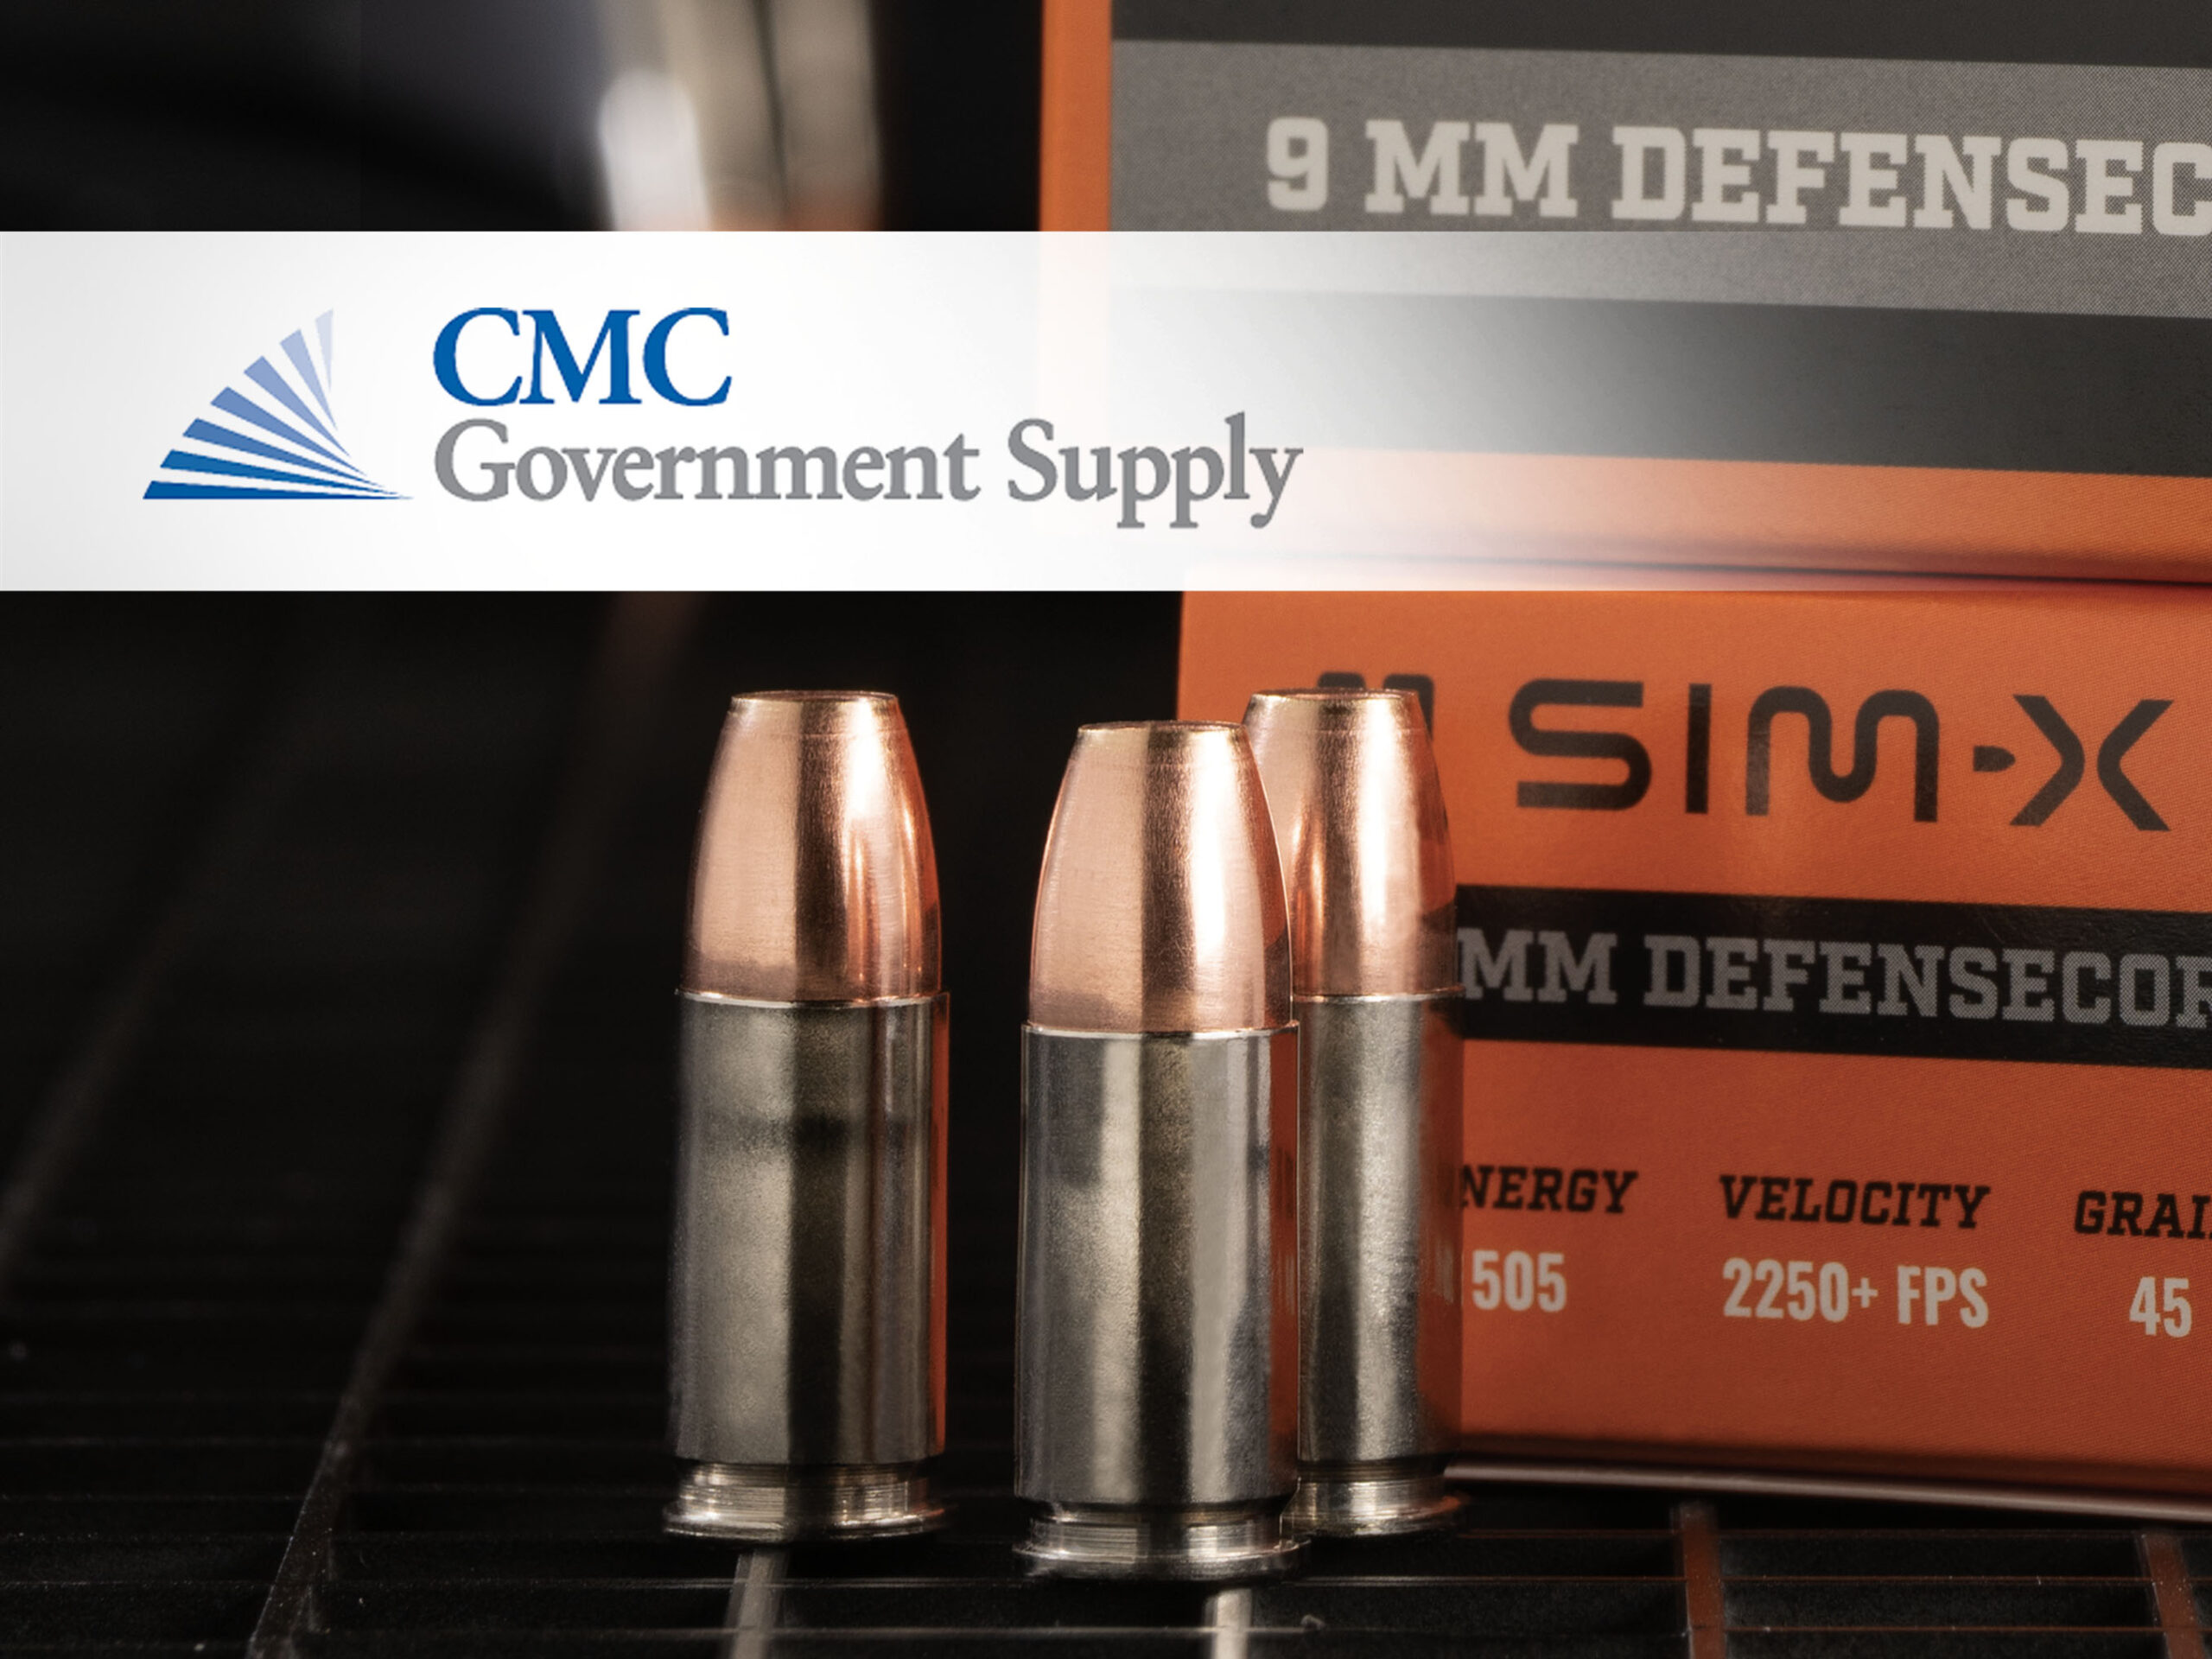 CMC Government Supply Appointed Exclusive Regional Government Distributor for SIM-X Ammunition to Law Enforcement, Government Agencies